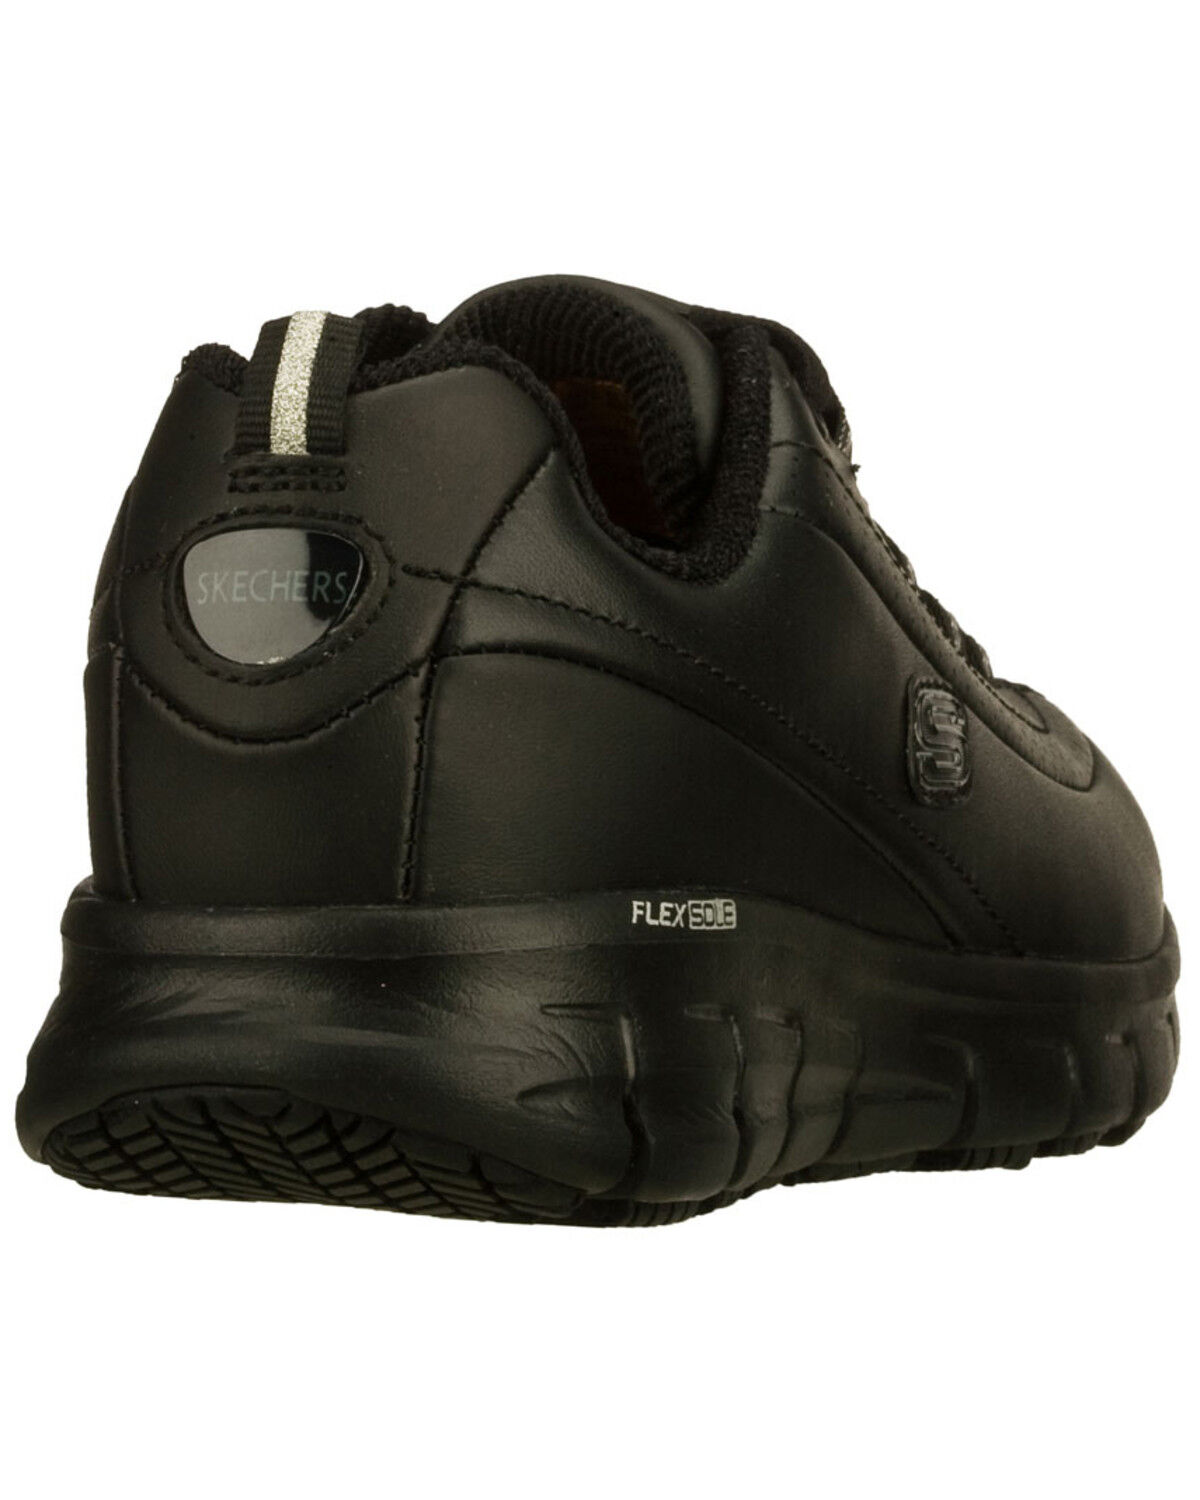 skechers sure track safety shoes